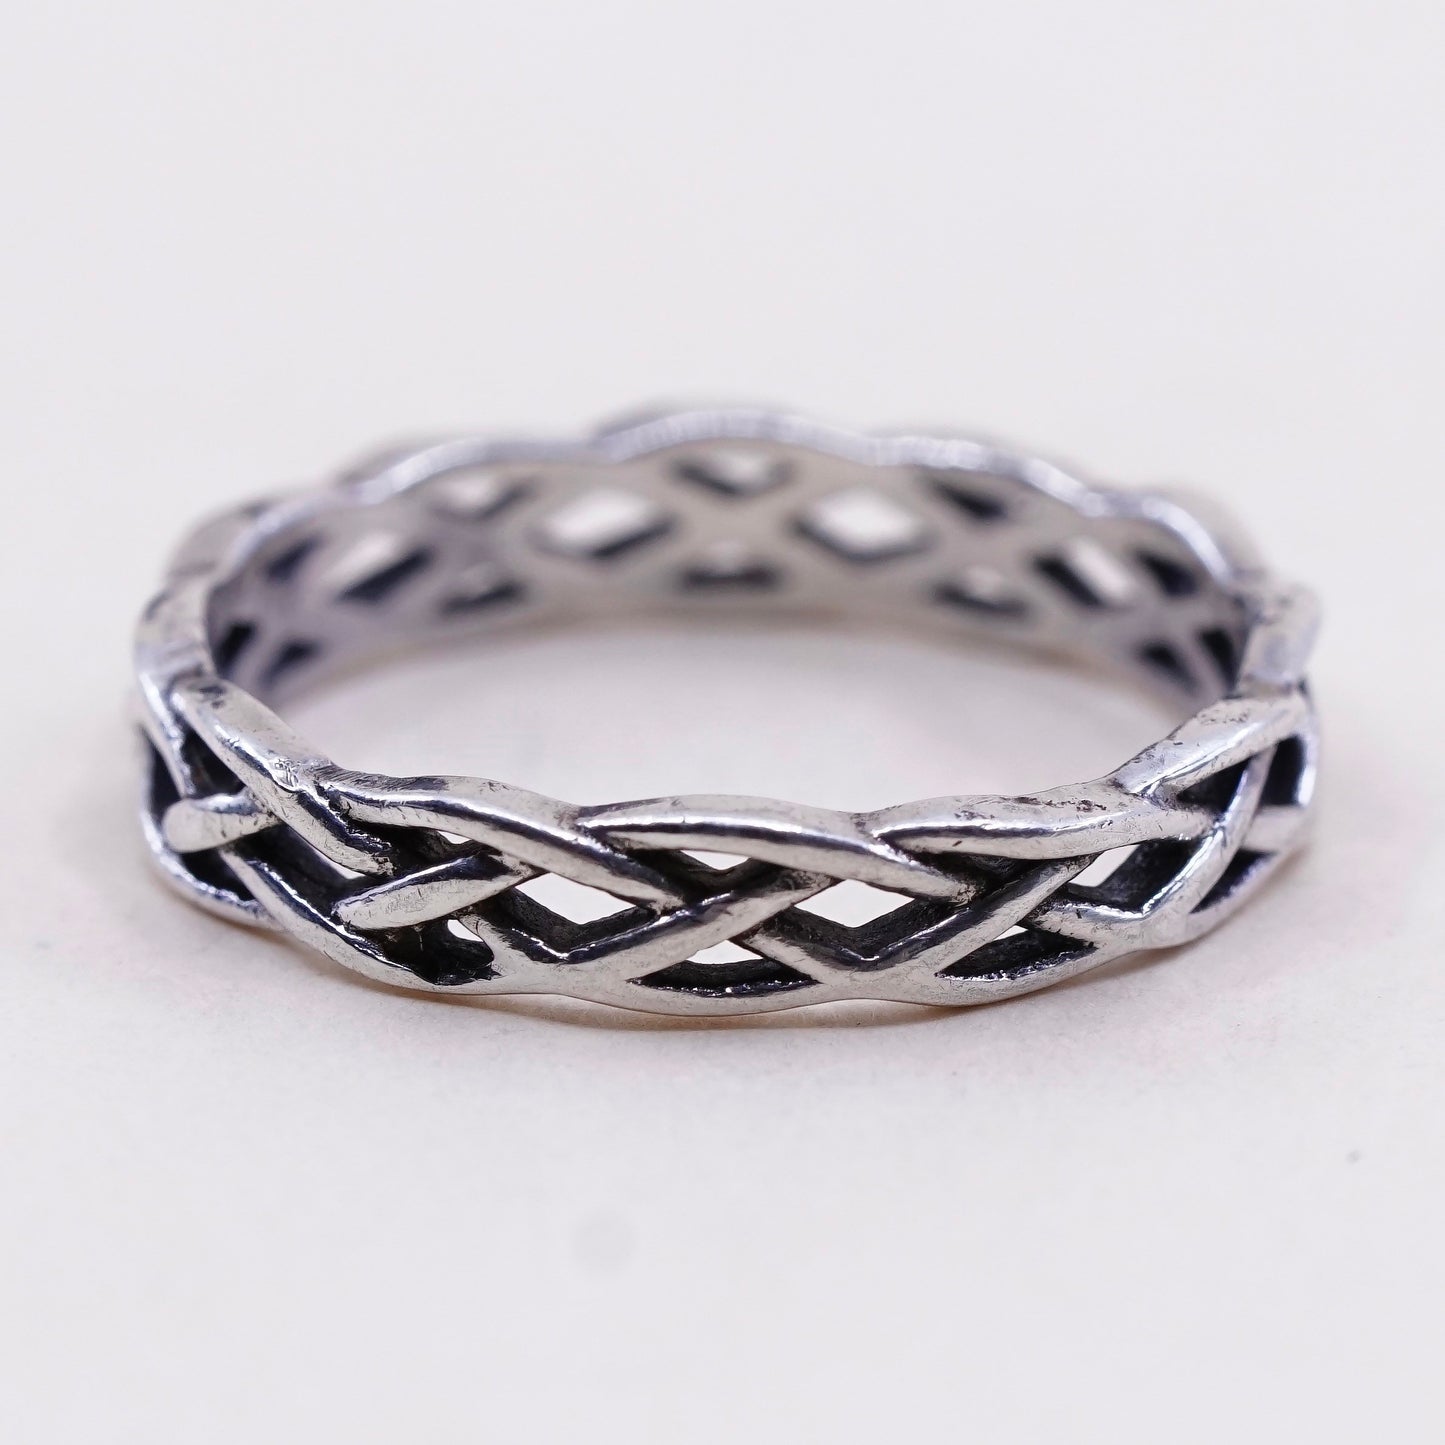 Size 8.25, vtg sterling silver handmade ring, Mexico 925 band w/ woven pattern